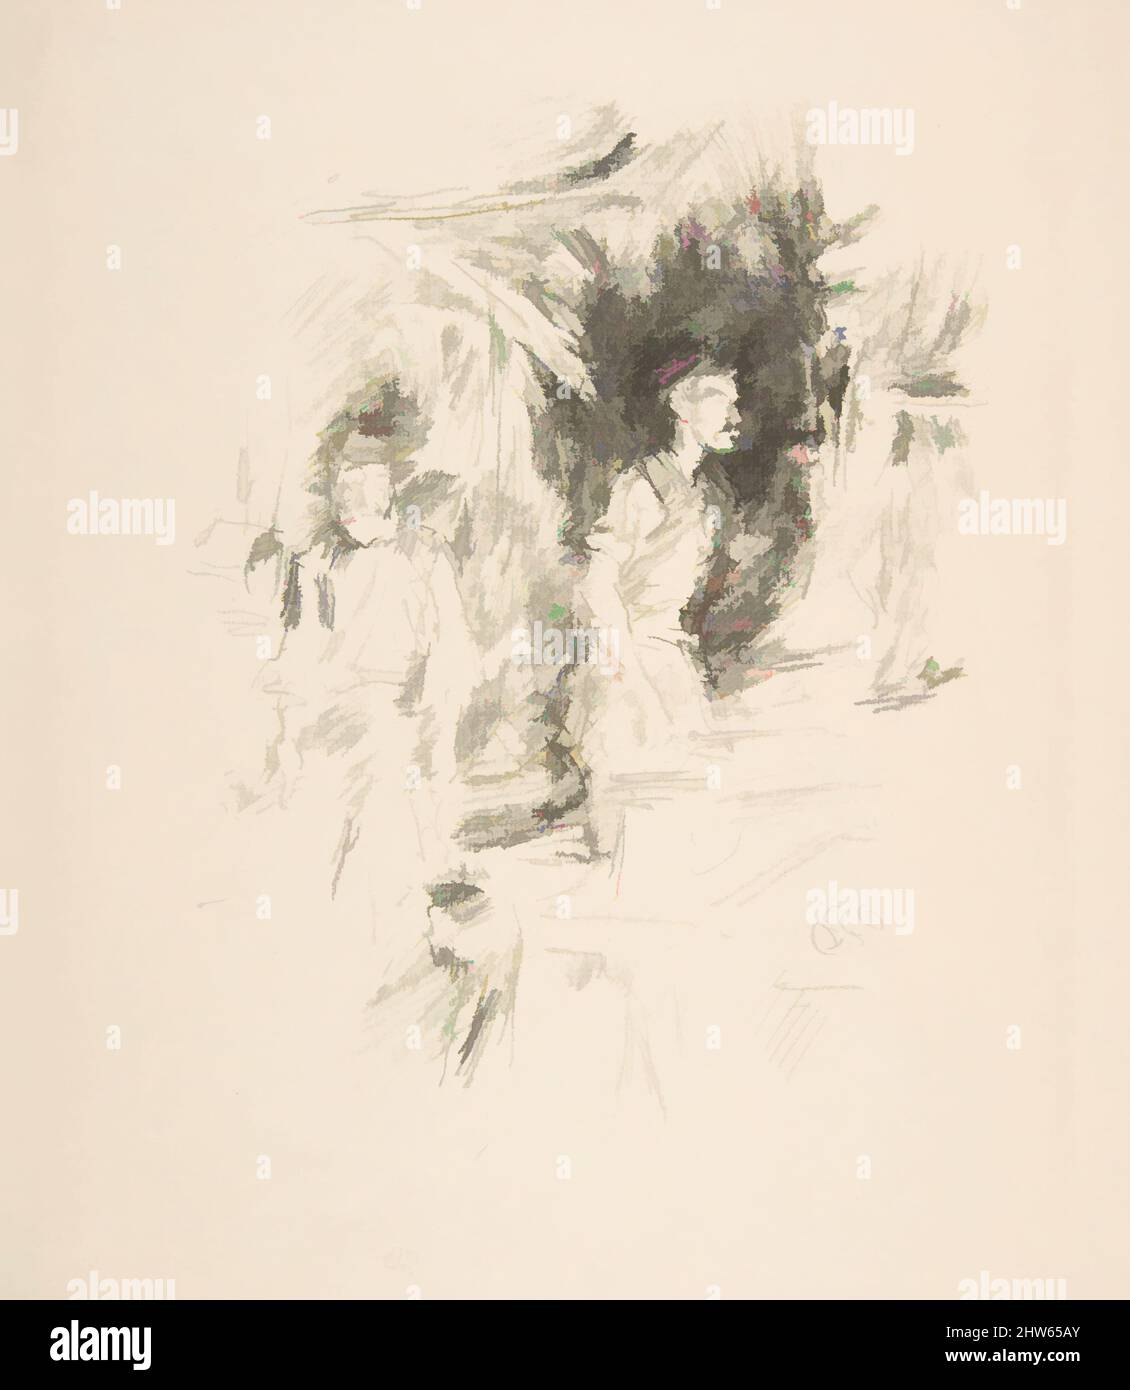 Art inspired by The Old Smith's Story, 1896, Transfer lithograph, drawn on thin, transparent transfer paper; only state (Chicago); printed in black ink on medium weight ivory laid paper, sheet: 11 1/16 x 8 7/8 in. (28.1 x 22.5 cm), Prints, James McNeill Whistler (American, Lowell, Classic works modernized by Artotop with a splash of modernity. Shapes, color and value, eye-catching visual impact on art. Emotions through freedom of artworks in a contemporary way. A timeless message pursuing a wildly creative new direction. Artists turning to the digital medium and creating the Artotop NFT Stock Photo